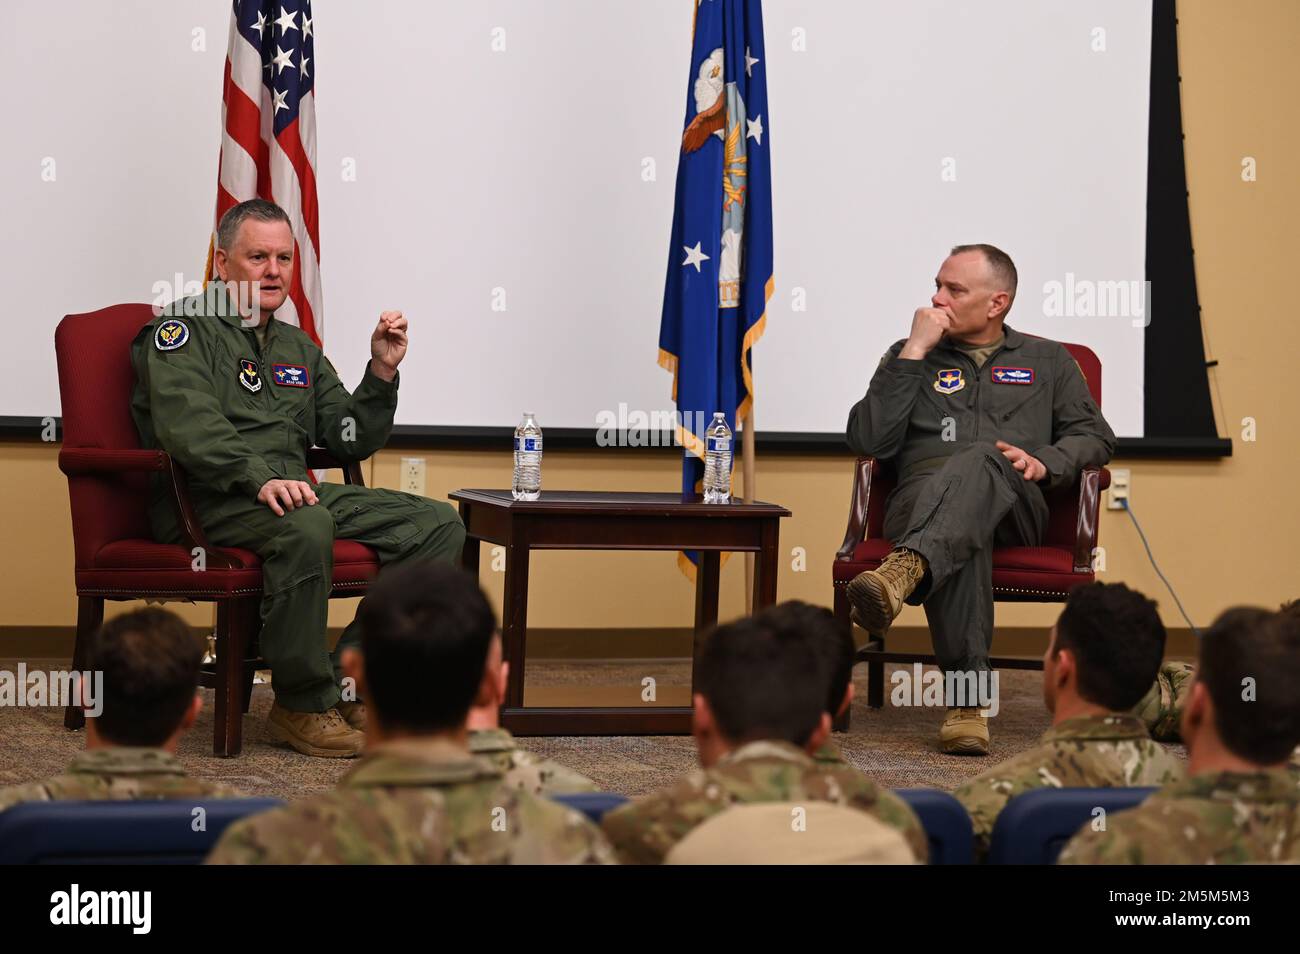 U.S. Air Force Lt. Gen. Brad Webb, commander of Air Education and Training Command, and Chief Master Sgt. Erik Thompson, AETC command chief, answer questions from Pararescue and Combat Rescue Officer students at the 351st Special Warfare Training Squadron, Kirtland Air Force Base, N.M., March 24, 2022. Webb and Thompson also spoke with 351SWTS leadership and watched PJ and CRO students practice rappelling. Stock Photo